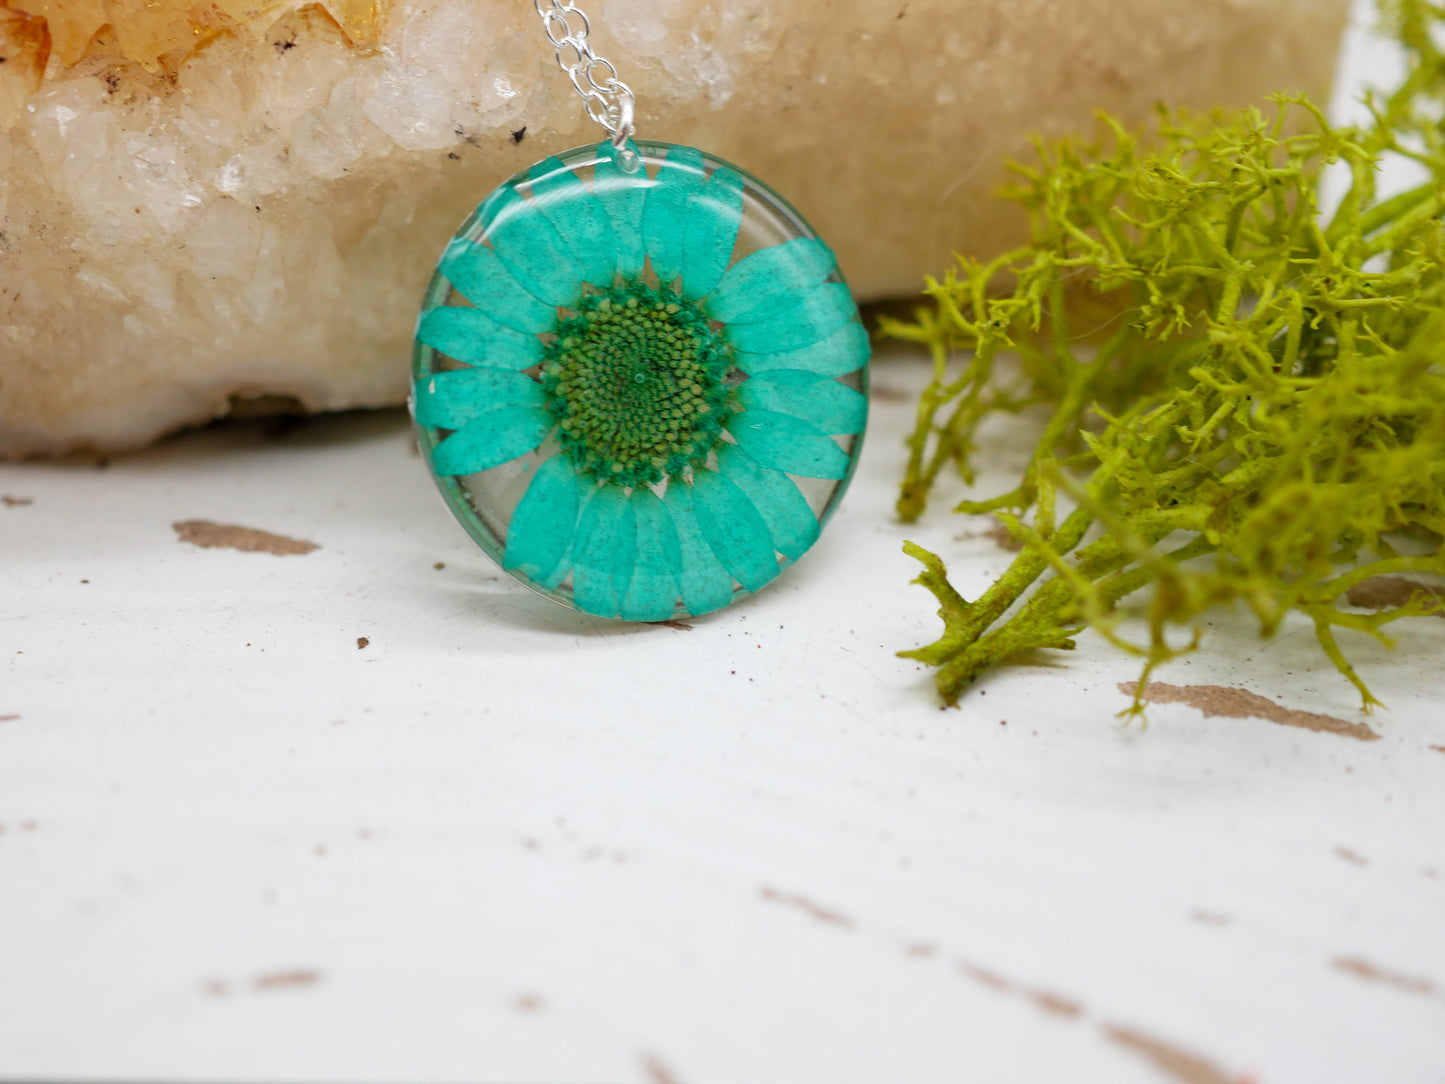 Pressed Blue daisy necklace